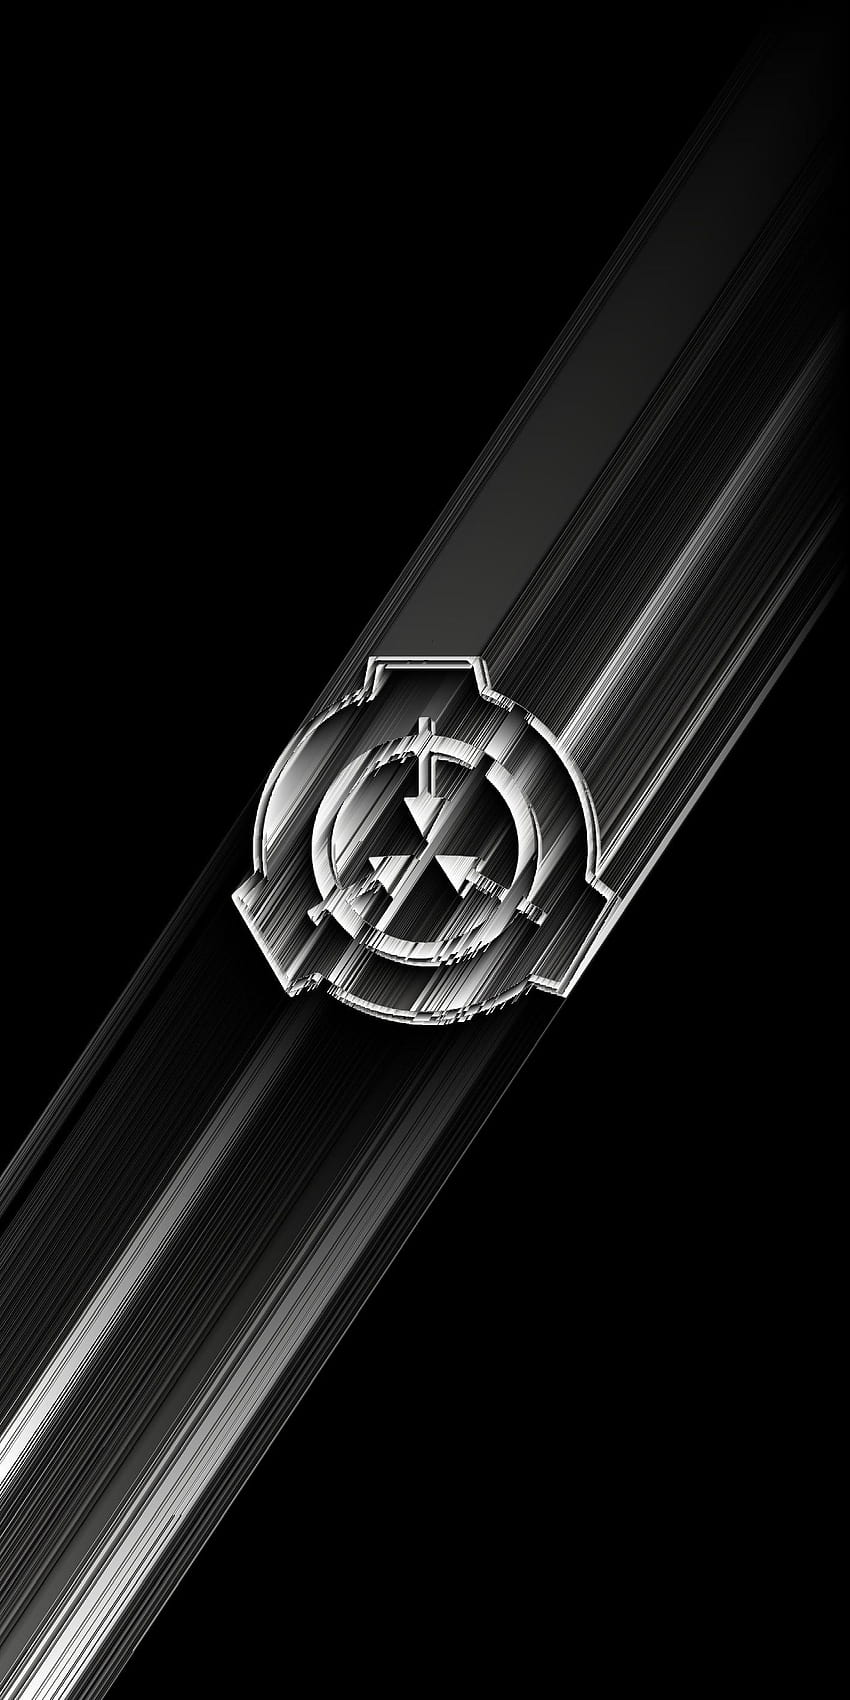 Phone Scp Foundation, scp phone HD phone wallpaper